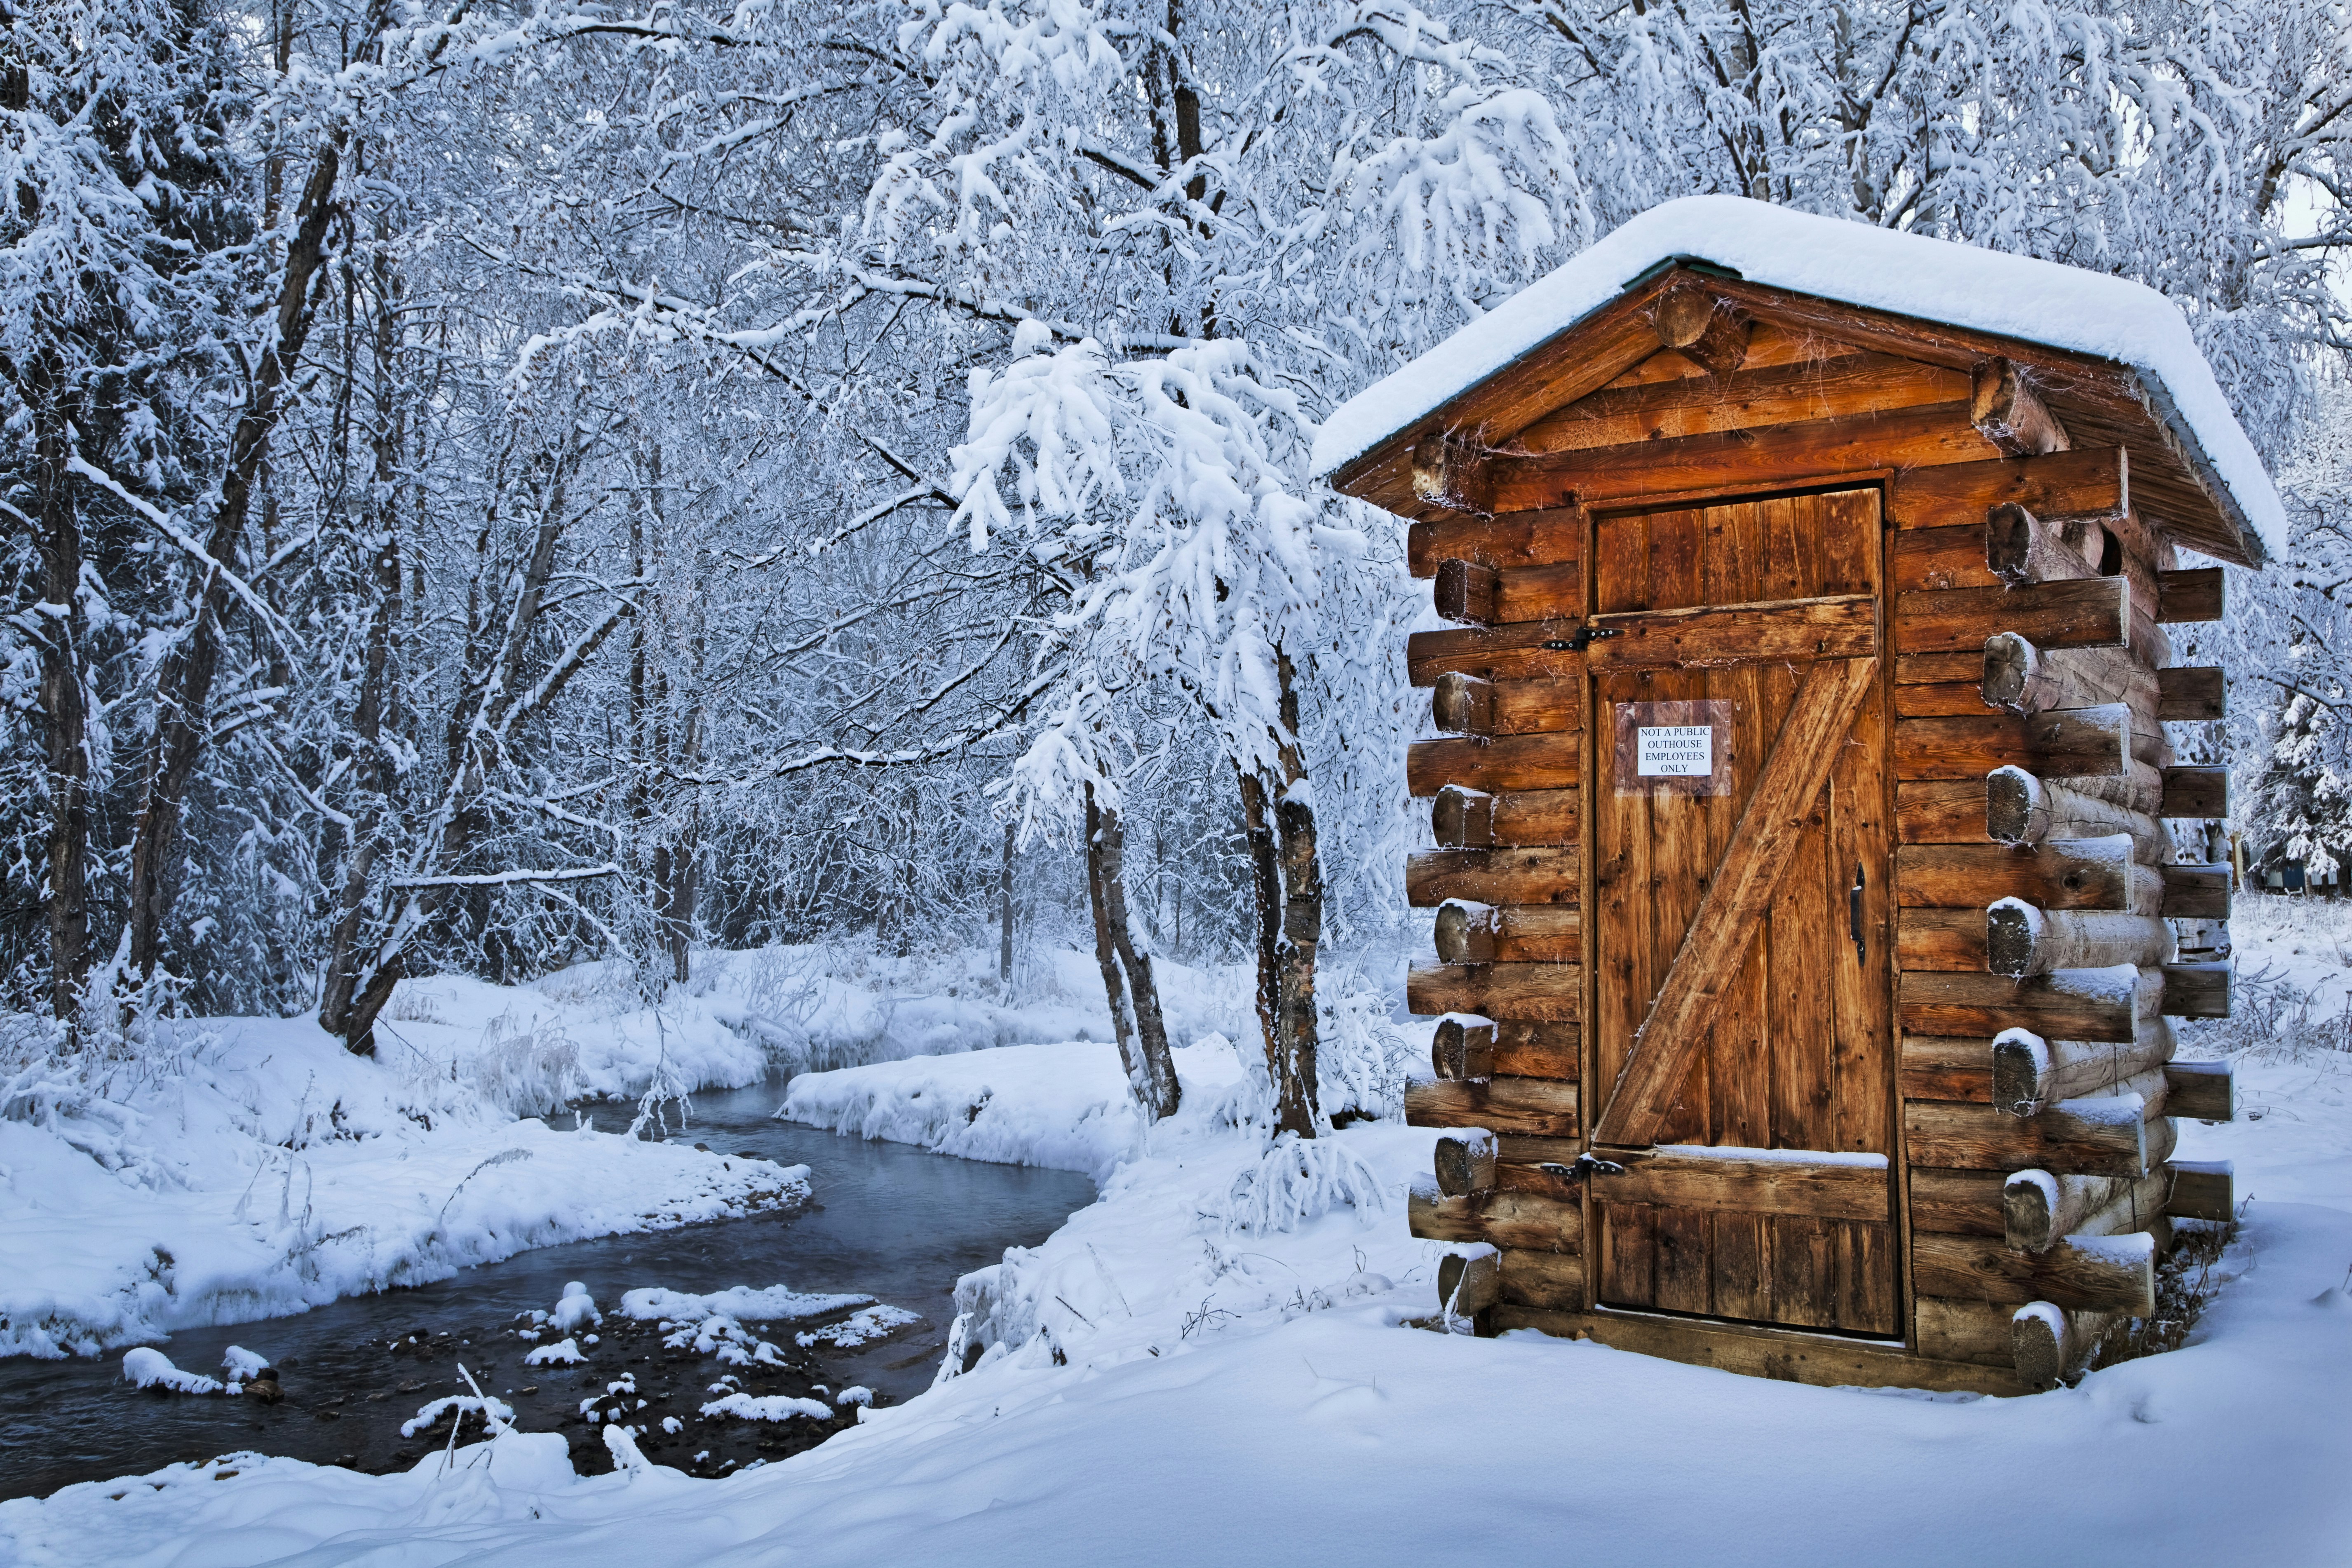 A wooden outhouse with a backdrop of a snowy forest